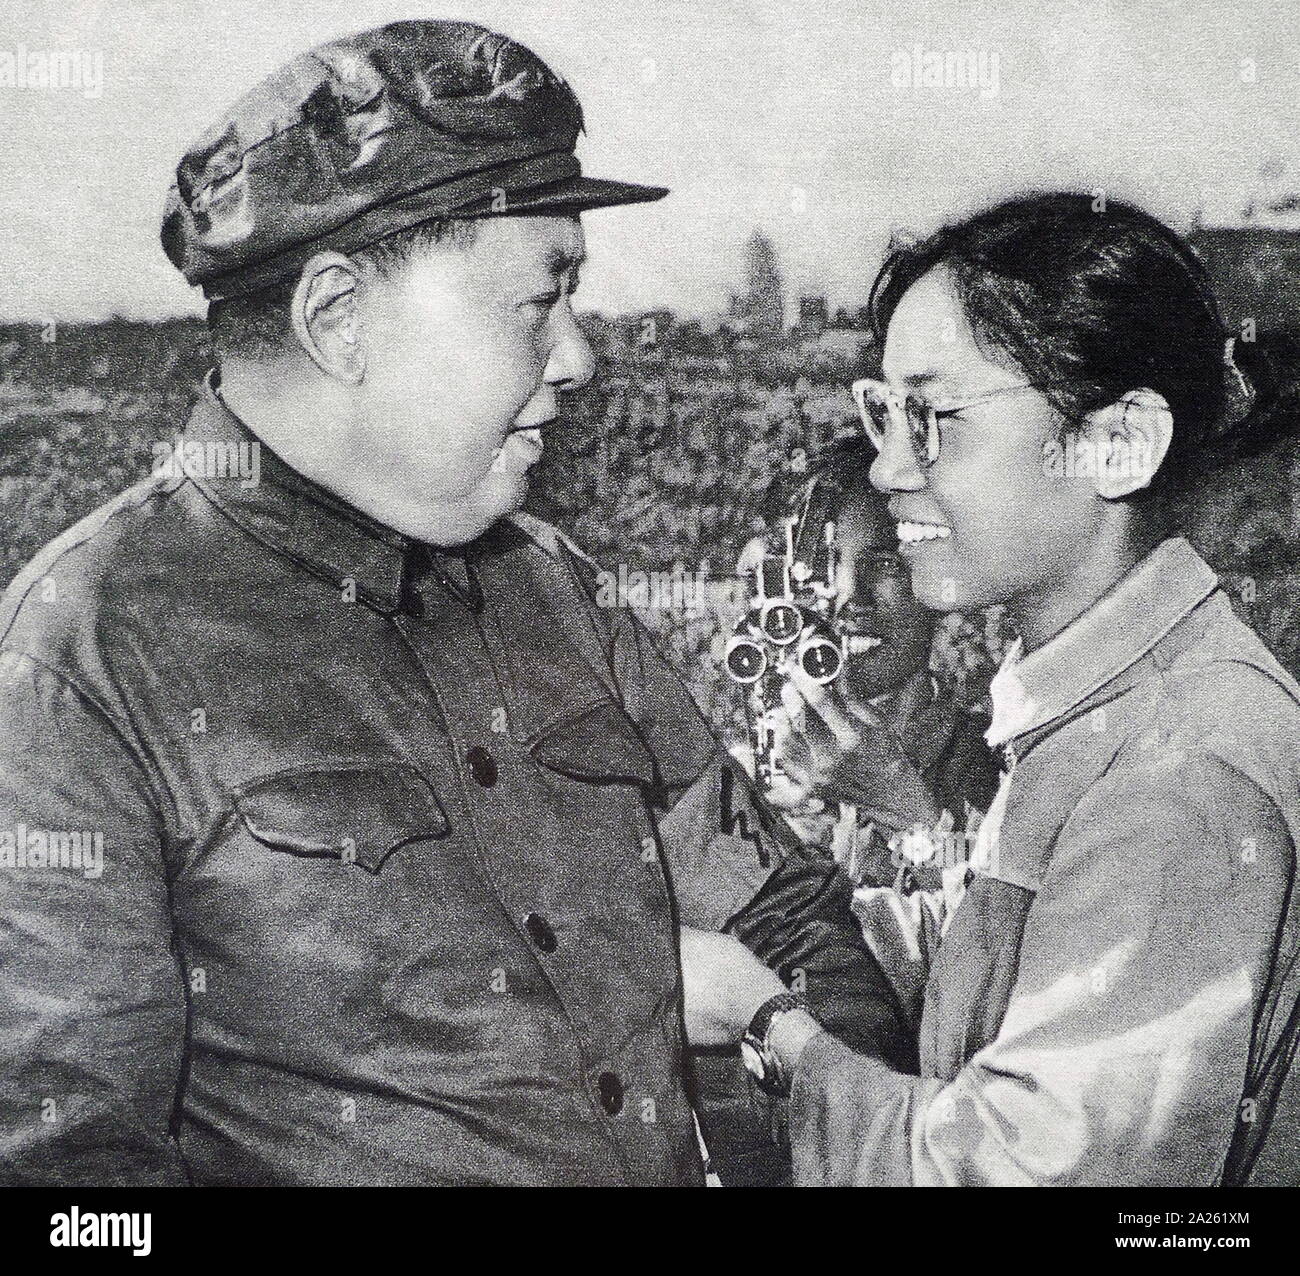 Chairman Mao with female Red Guard, during the Cultural Revolution. 1966. Mao Zedong (1893 - September 9, 1976), was a Chinese communist revolutionary who became the founding father of the People's Republic of China (PRC), which he ruled as the Chairman of the Communist Party of China from its establishment in 1949 until his death Stock Photo